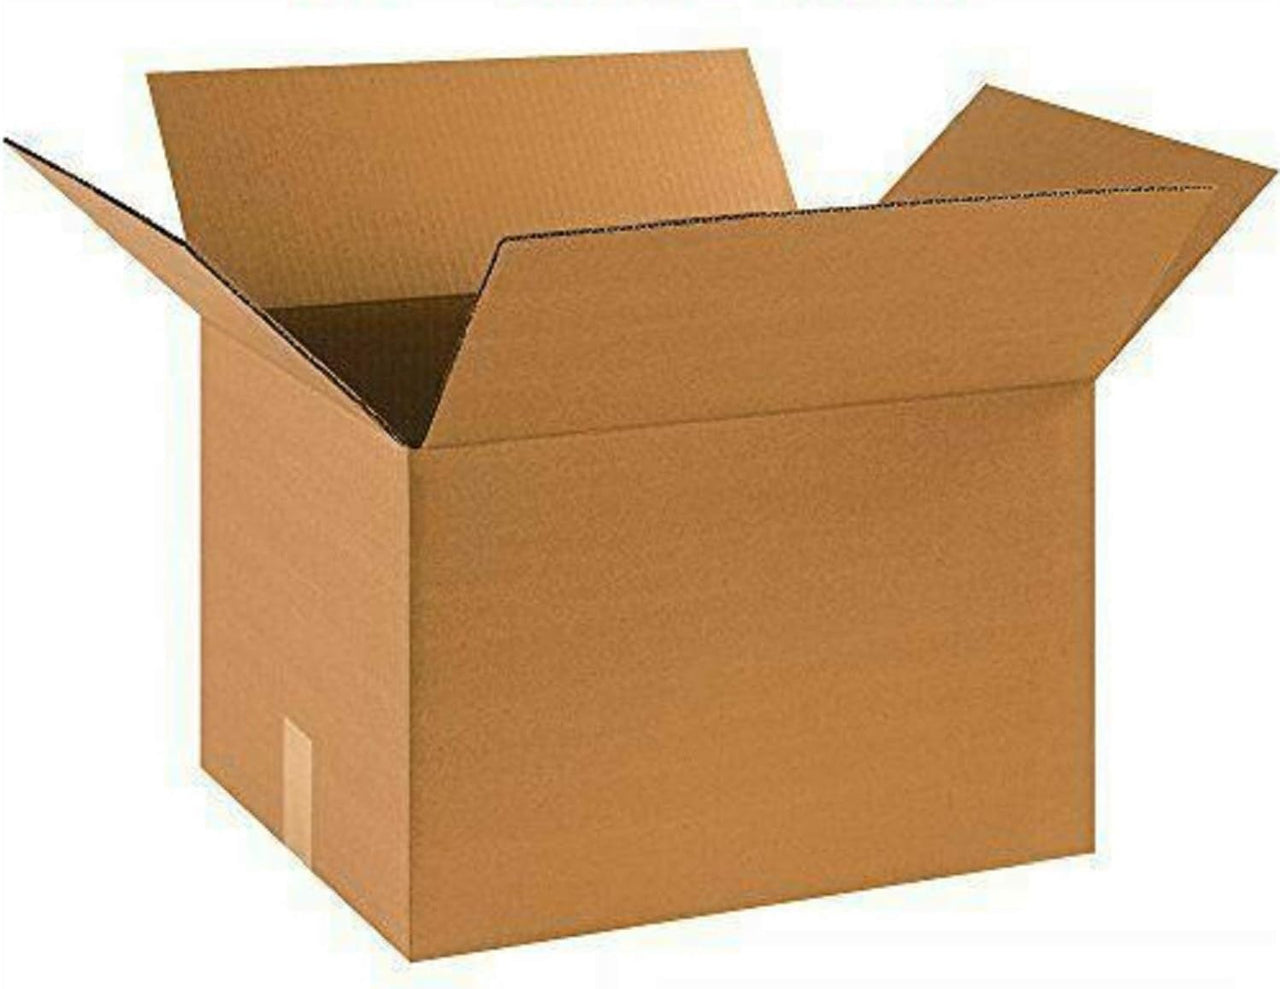 Shipping Boxes 14"L x 14"W x 14"H 10-Pack Corrugated Cardboard Box for Packing Moving Storage